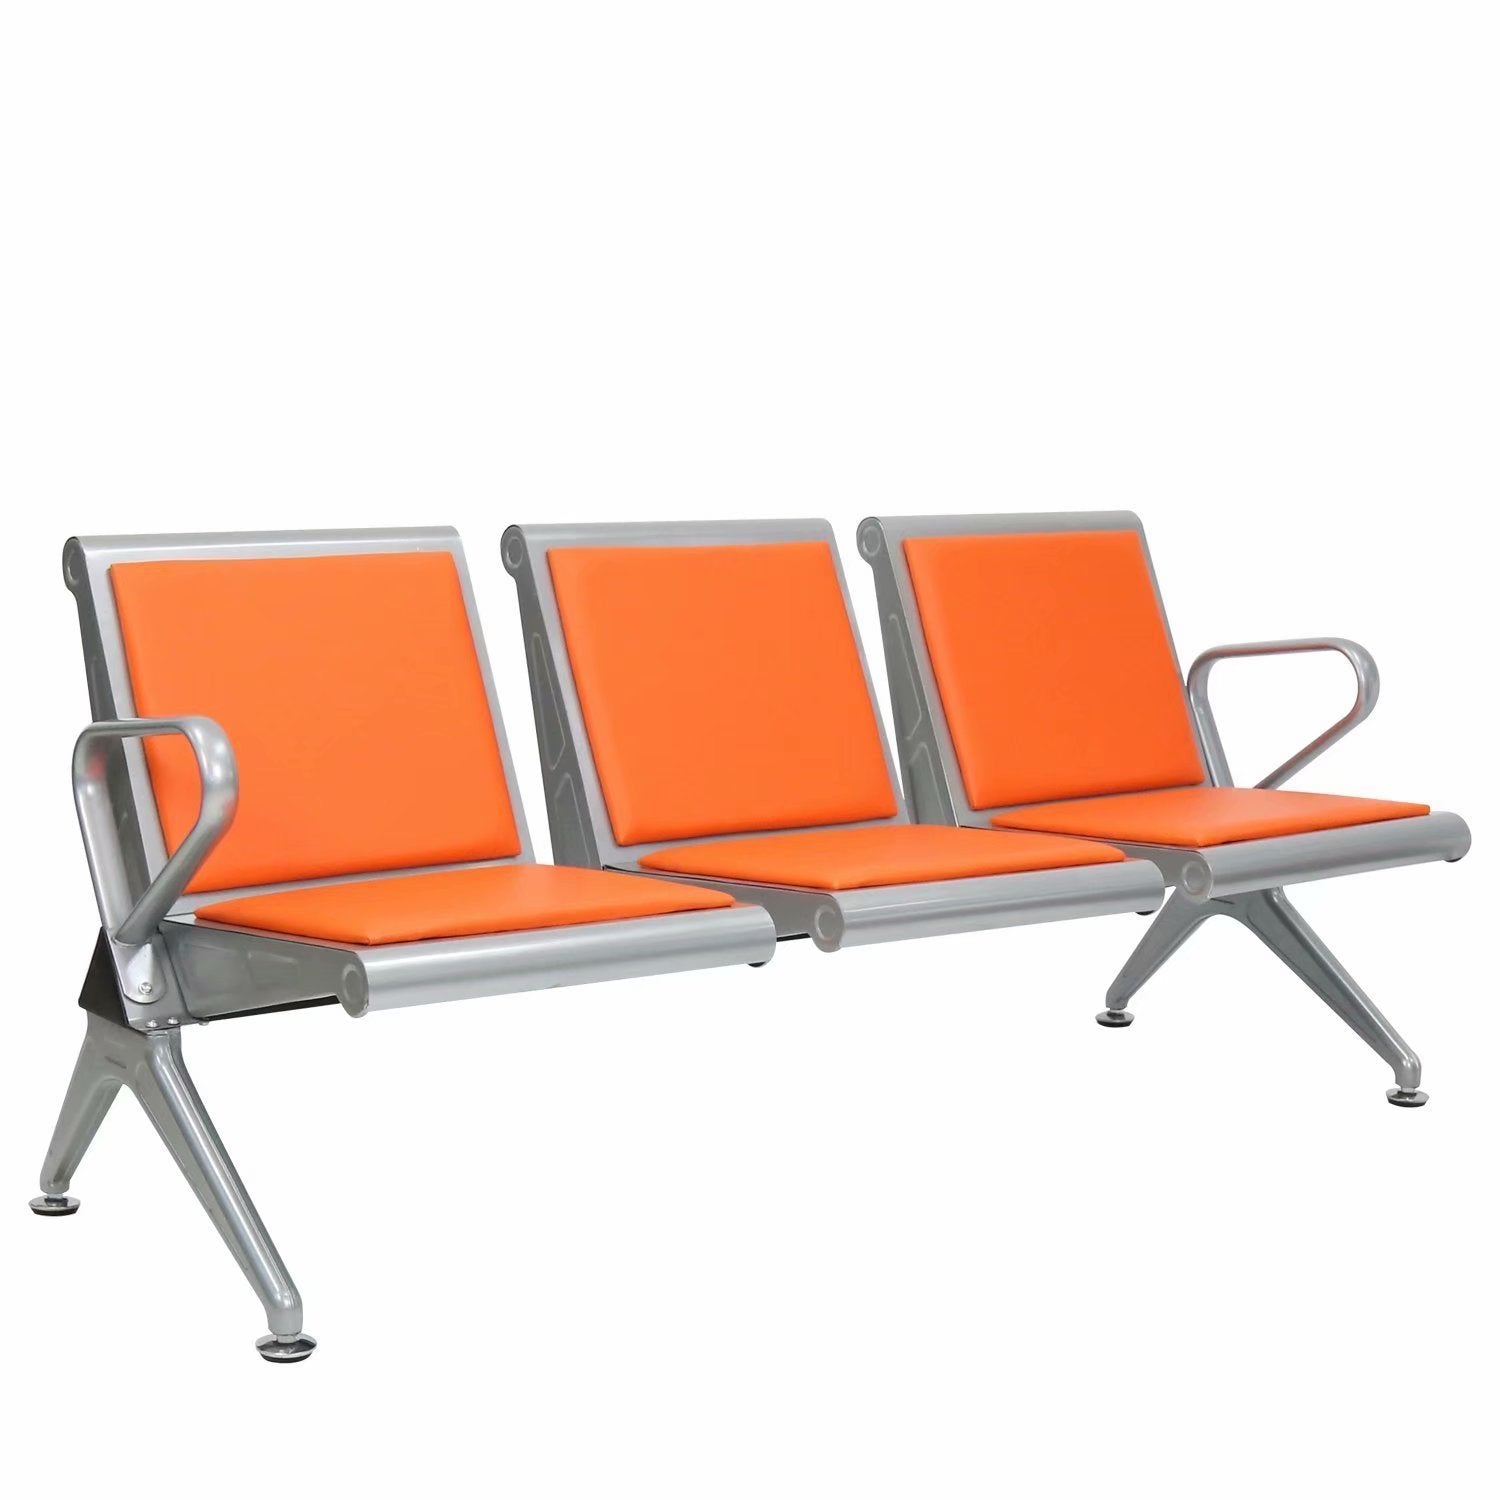 Stainless Steel Bench with Leather Cushion-Orange